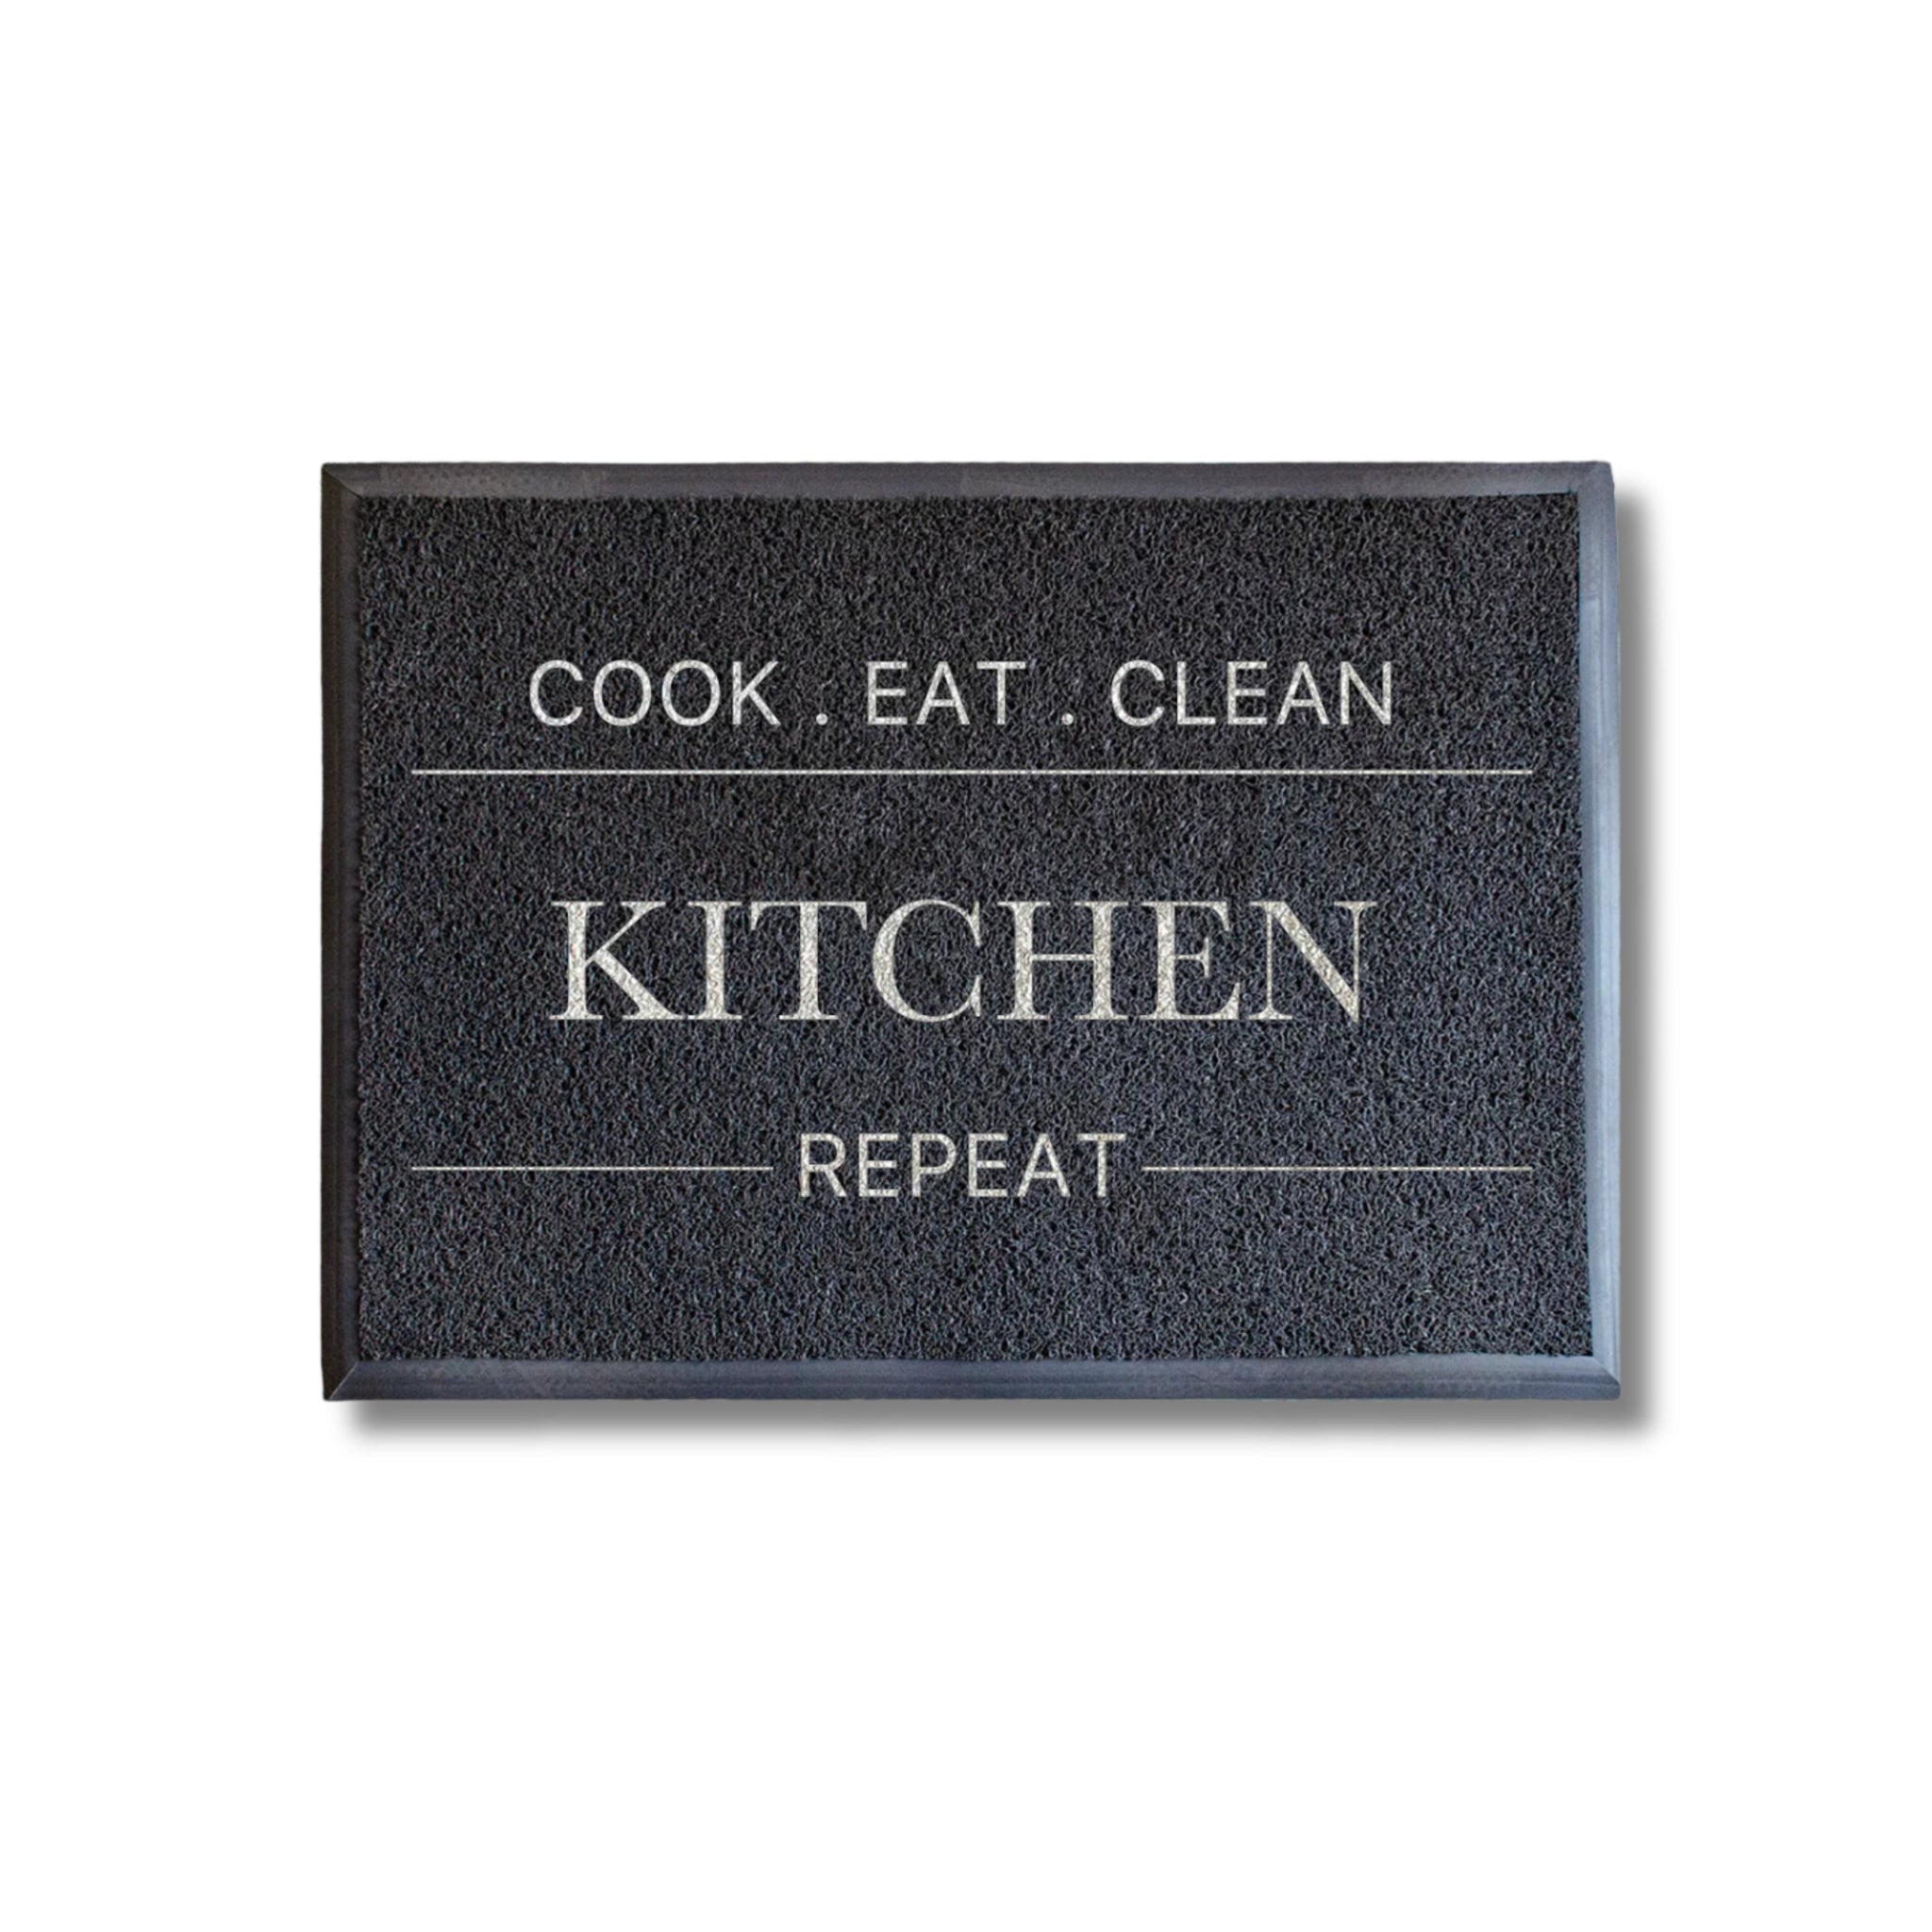 Cook - Eat - Clean